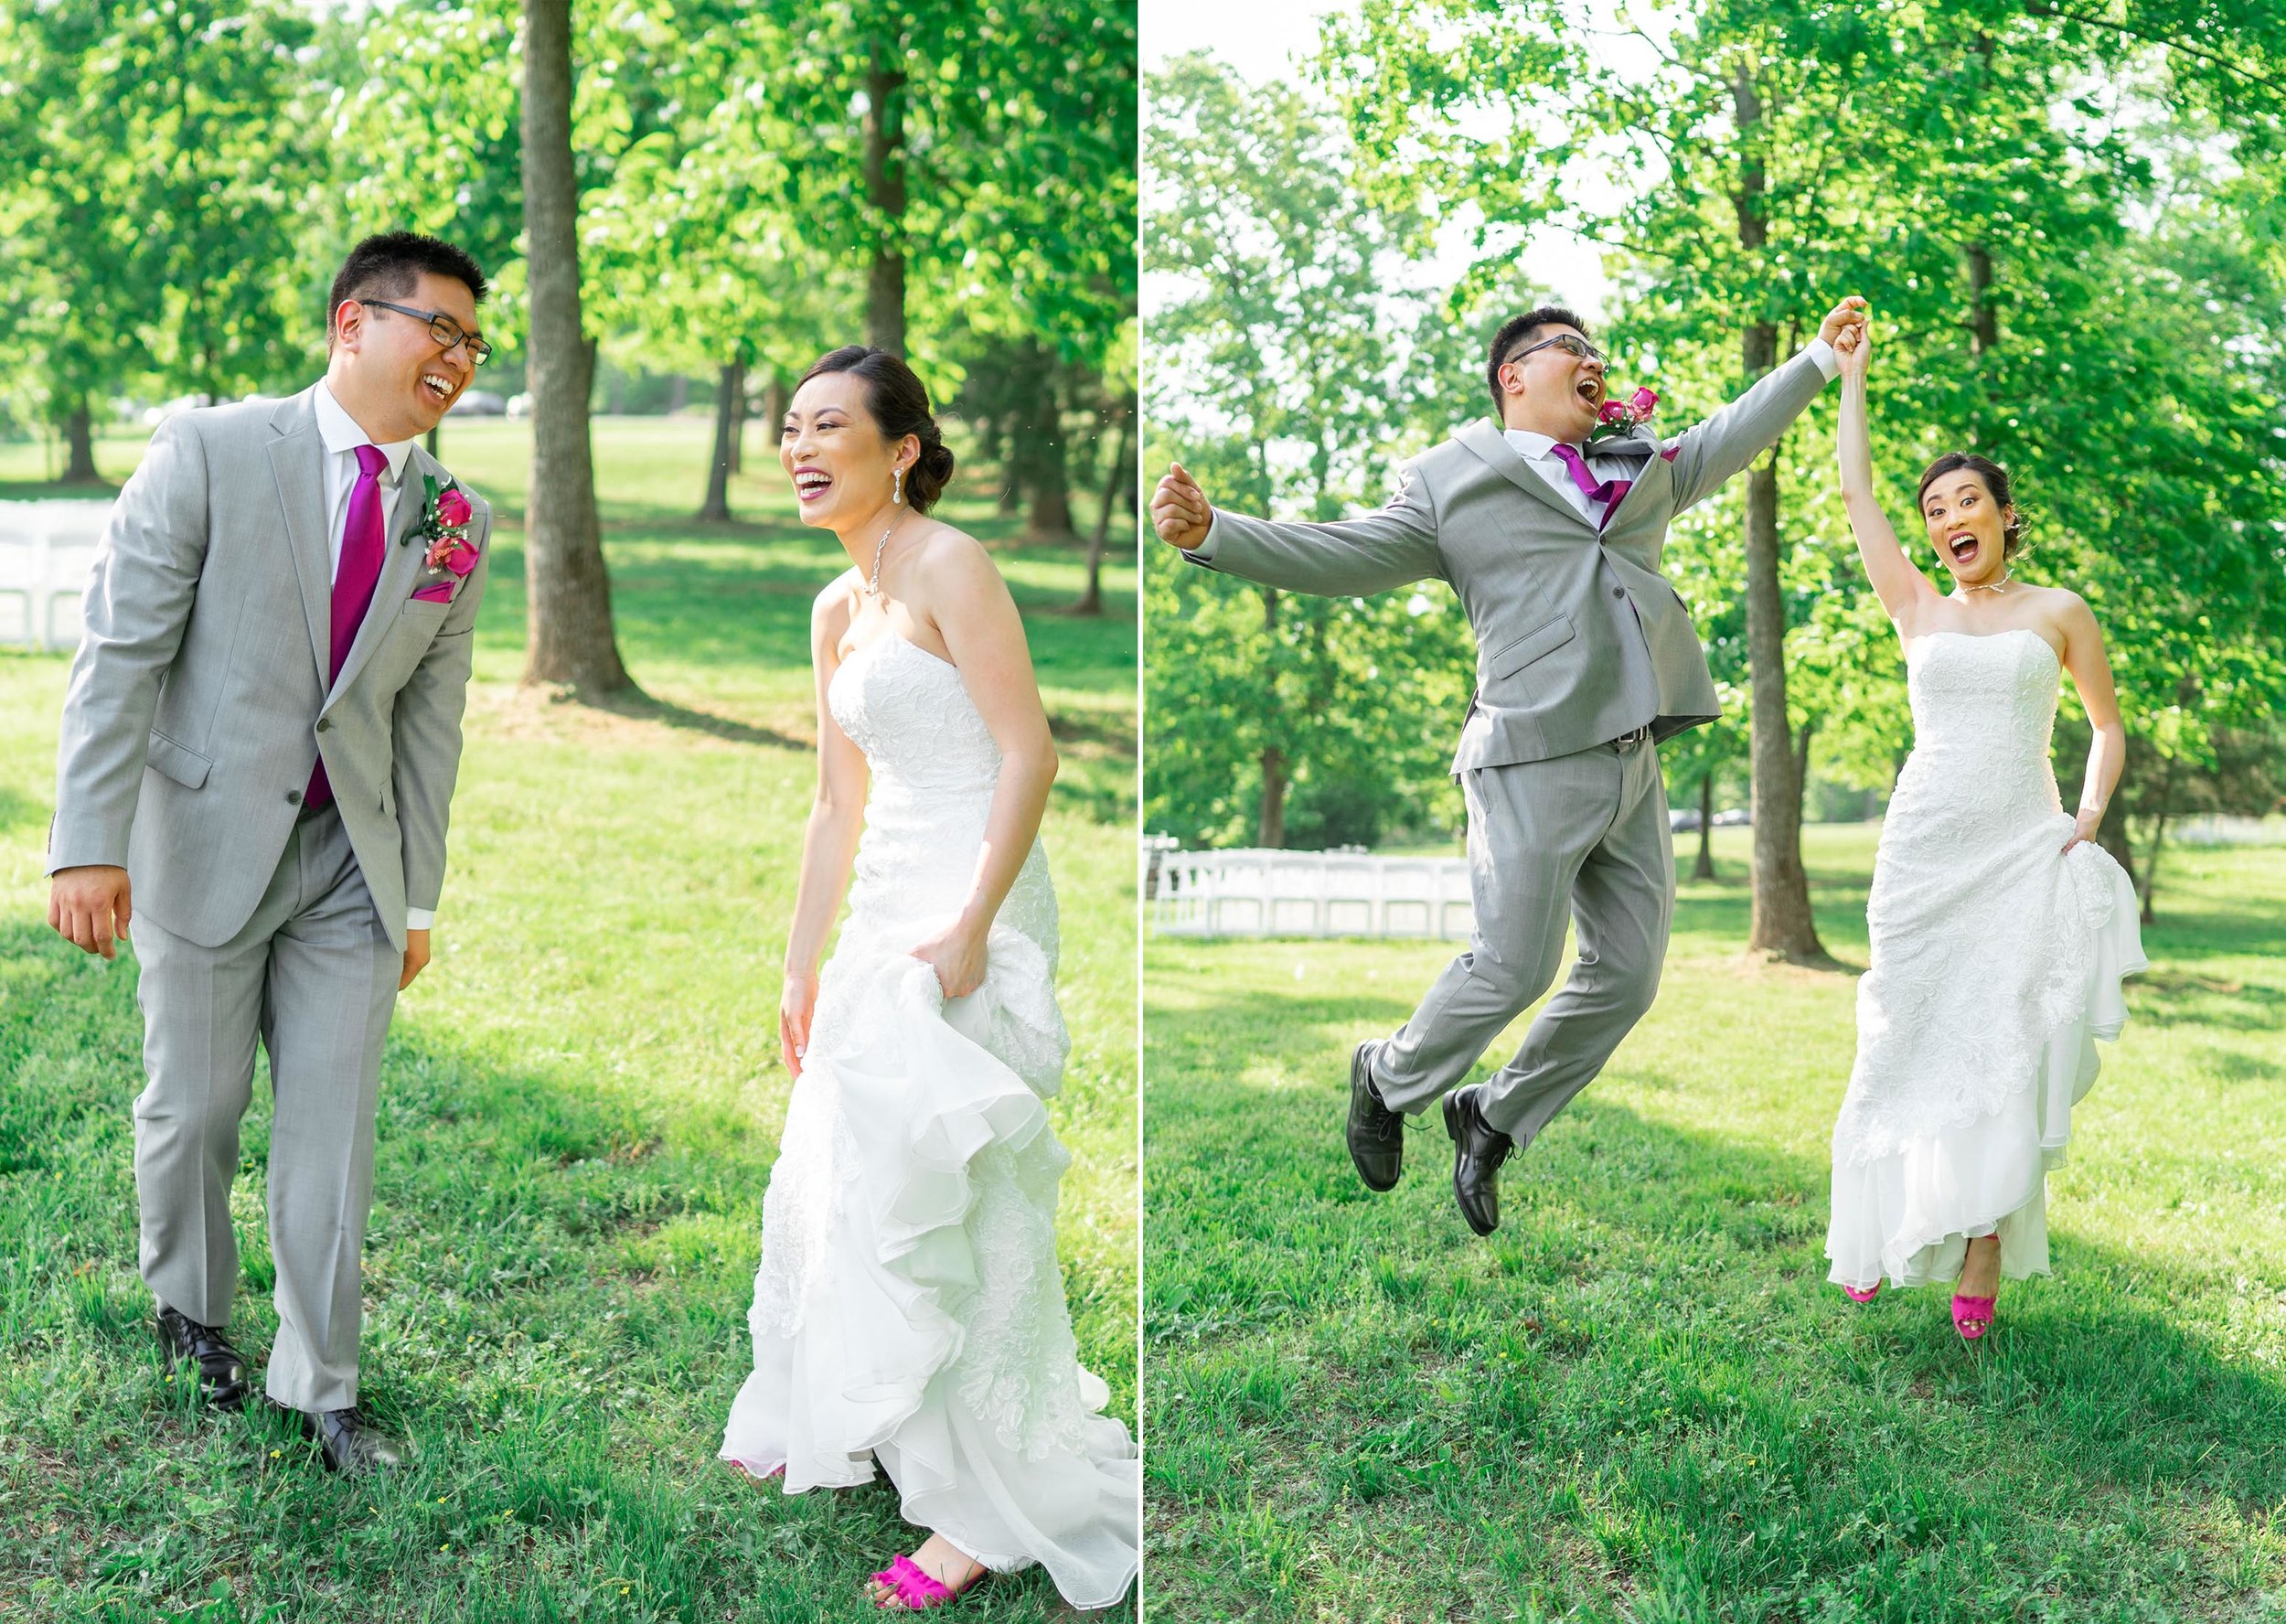 Bride and groom jumping in the air and laughing